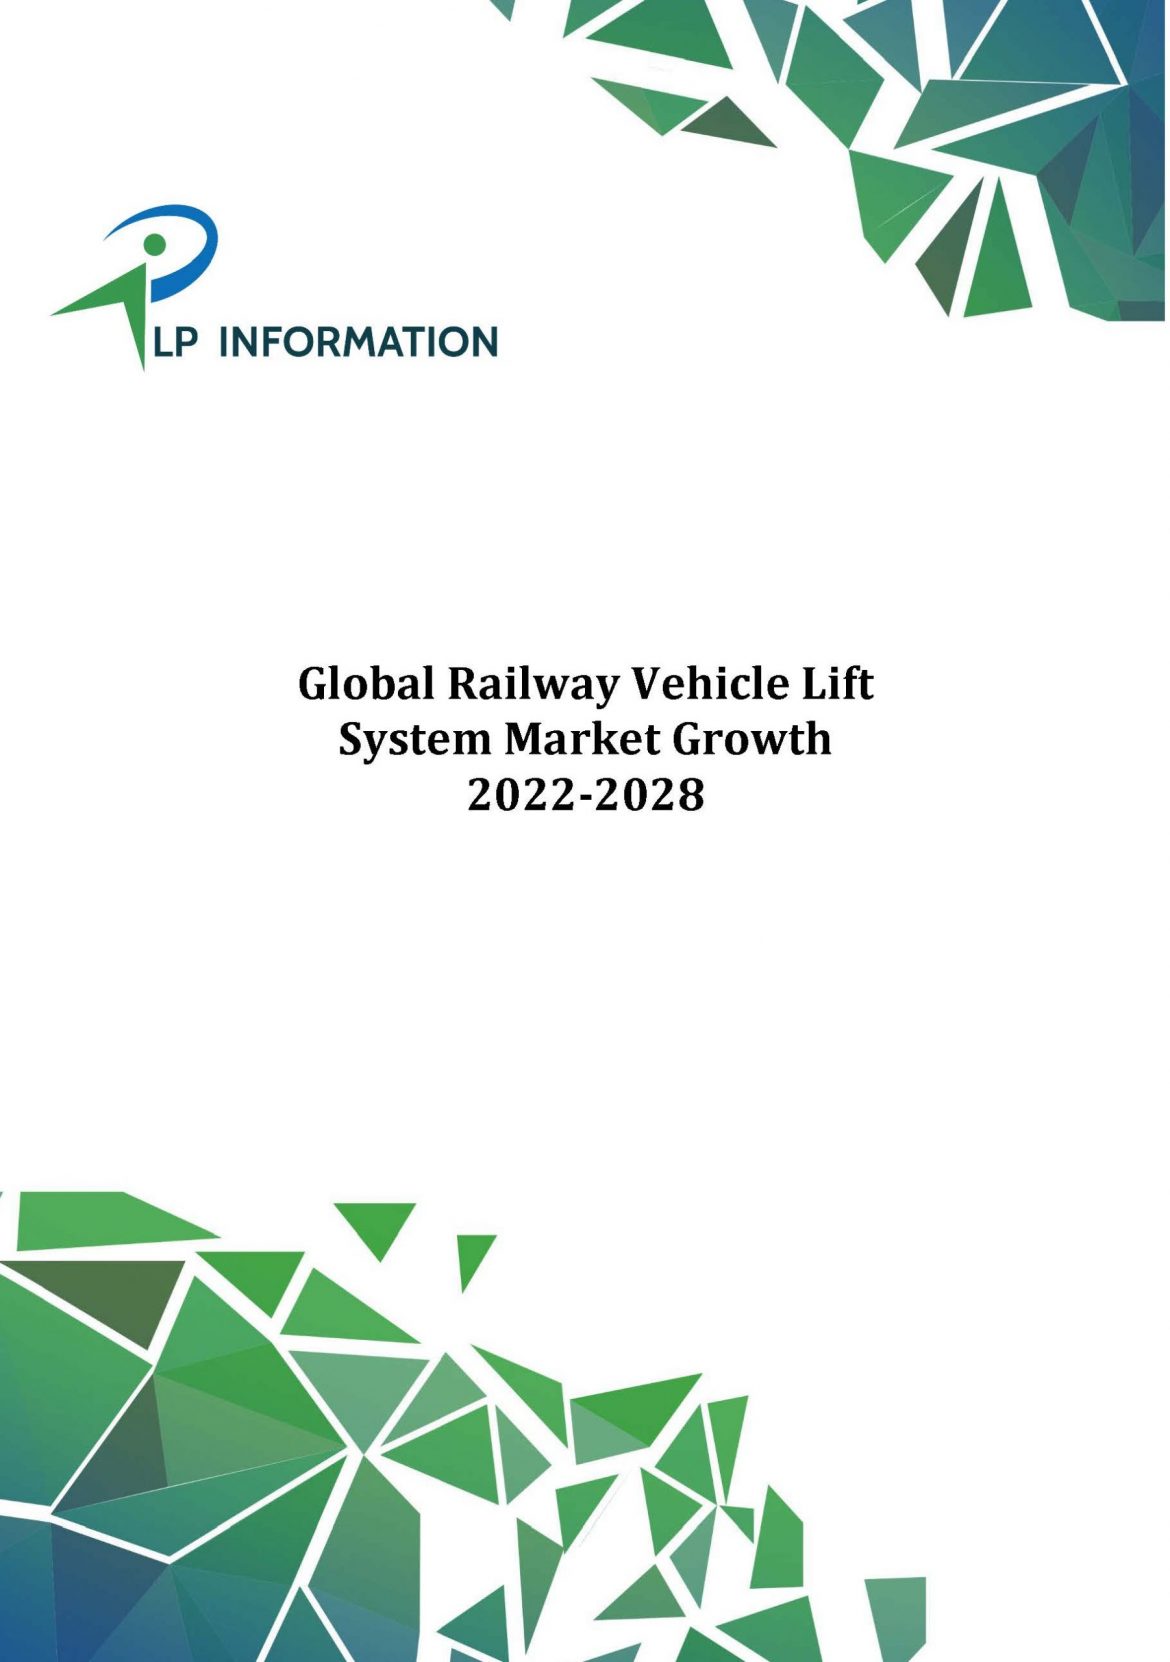 Global Railway Vehicle Lift System Market Growth 2022-2028